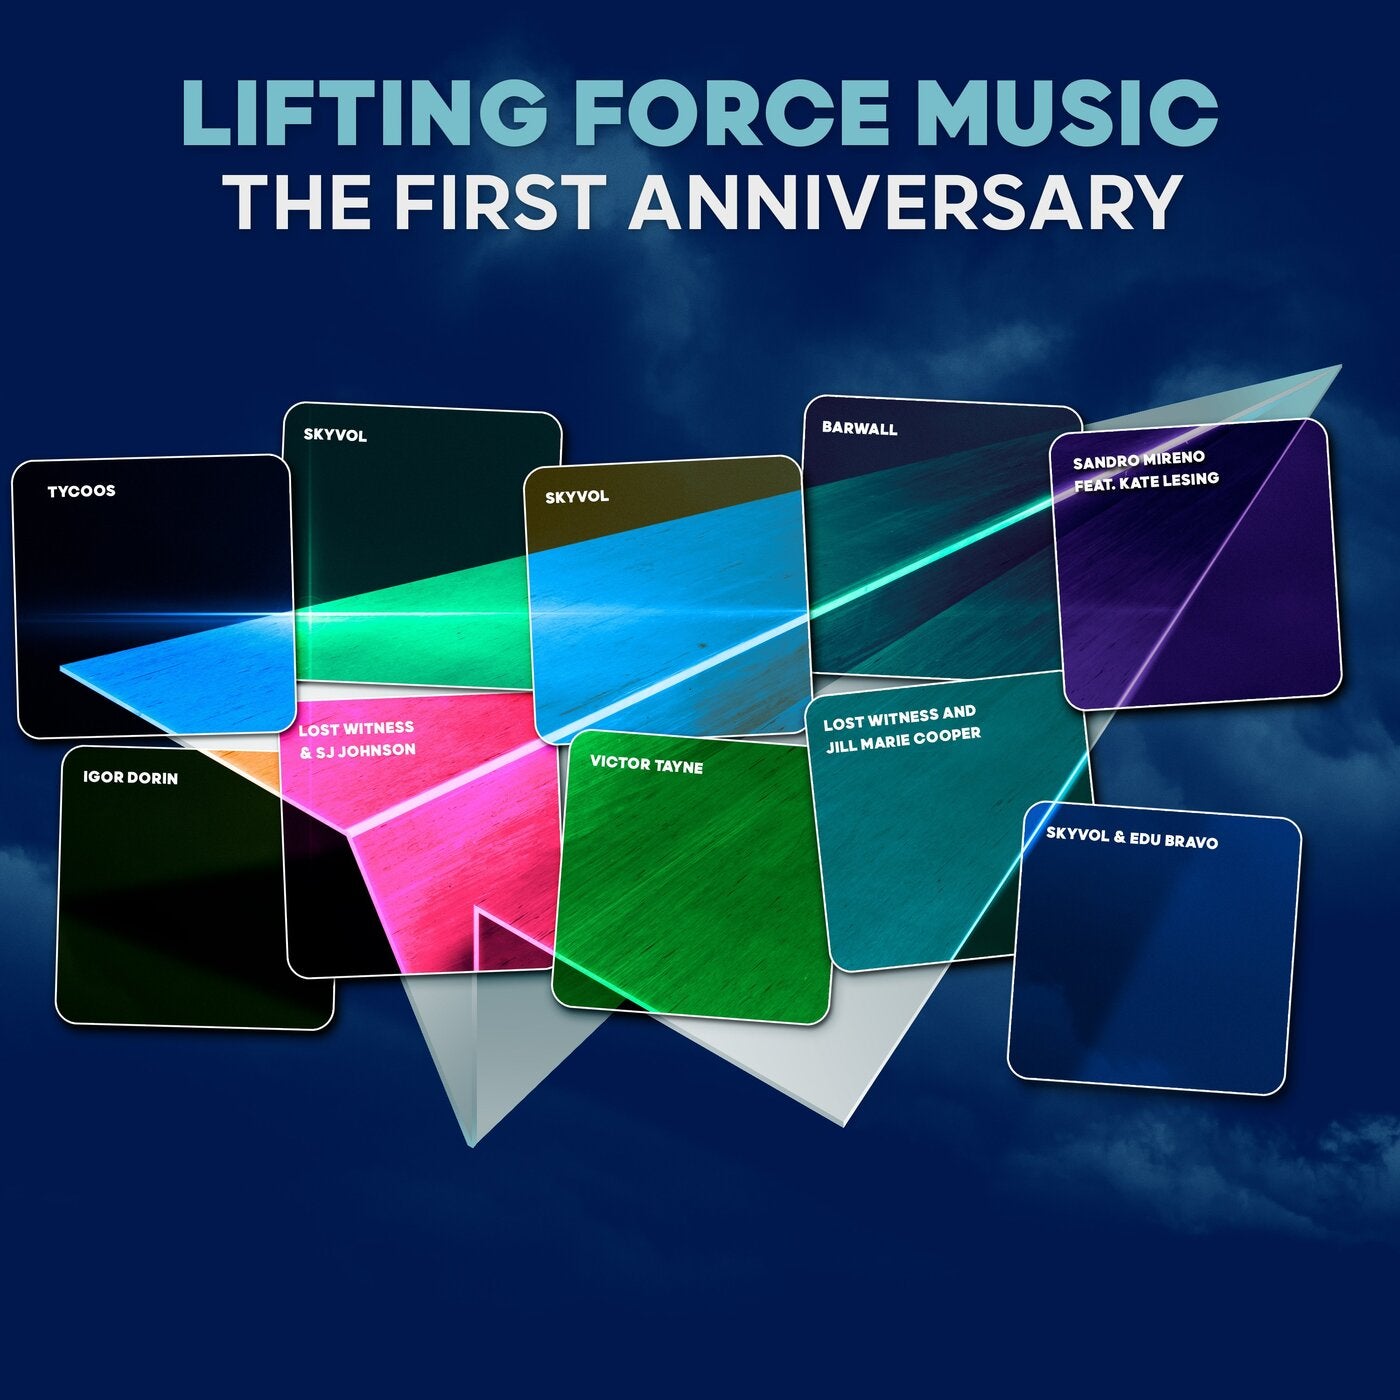 Lifting Force Music: The First Anniversary